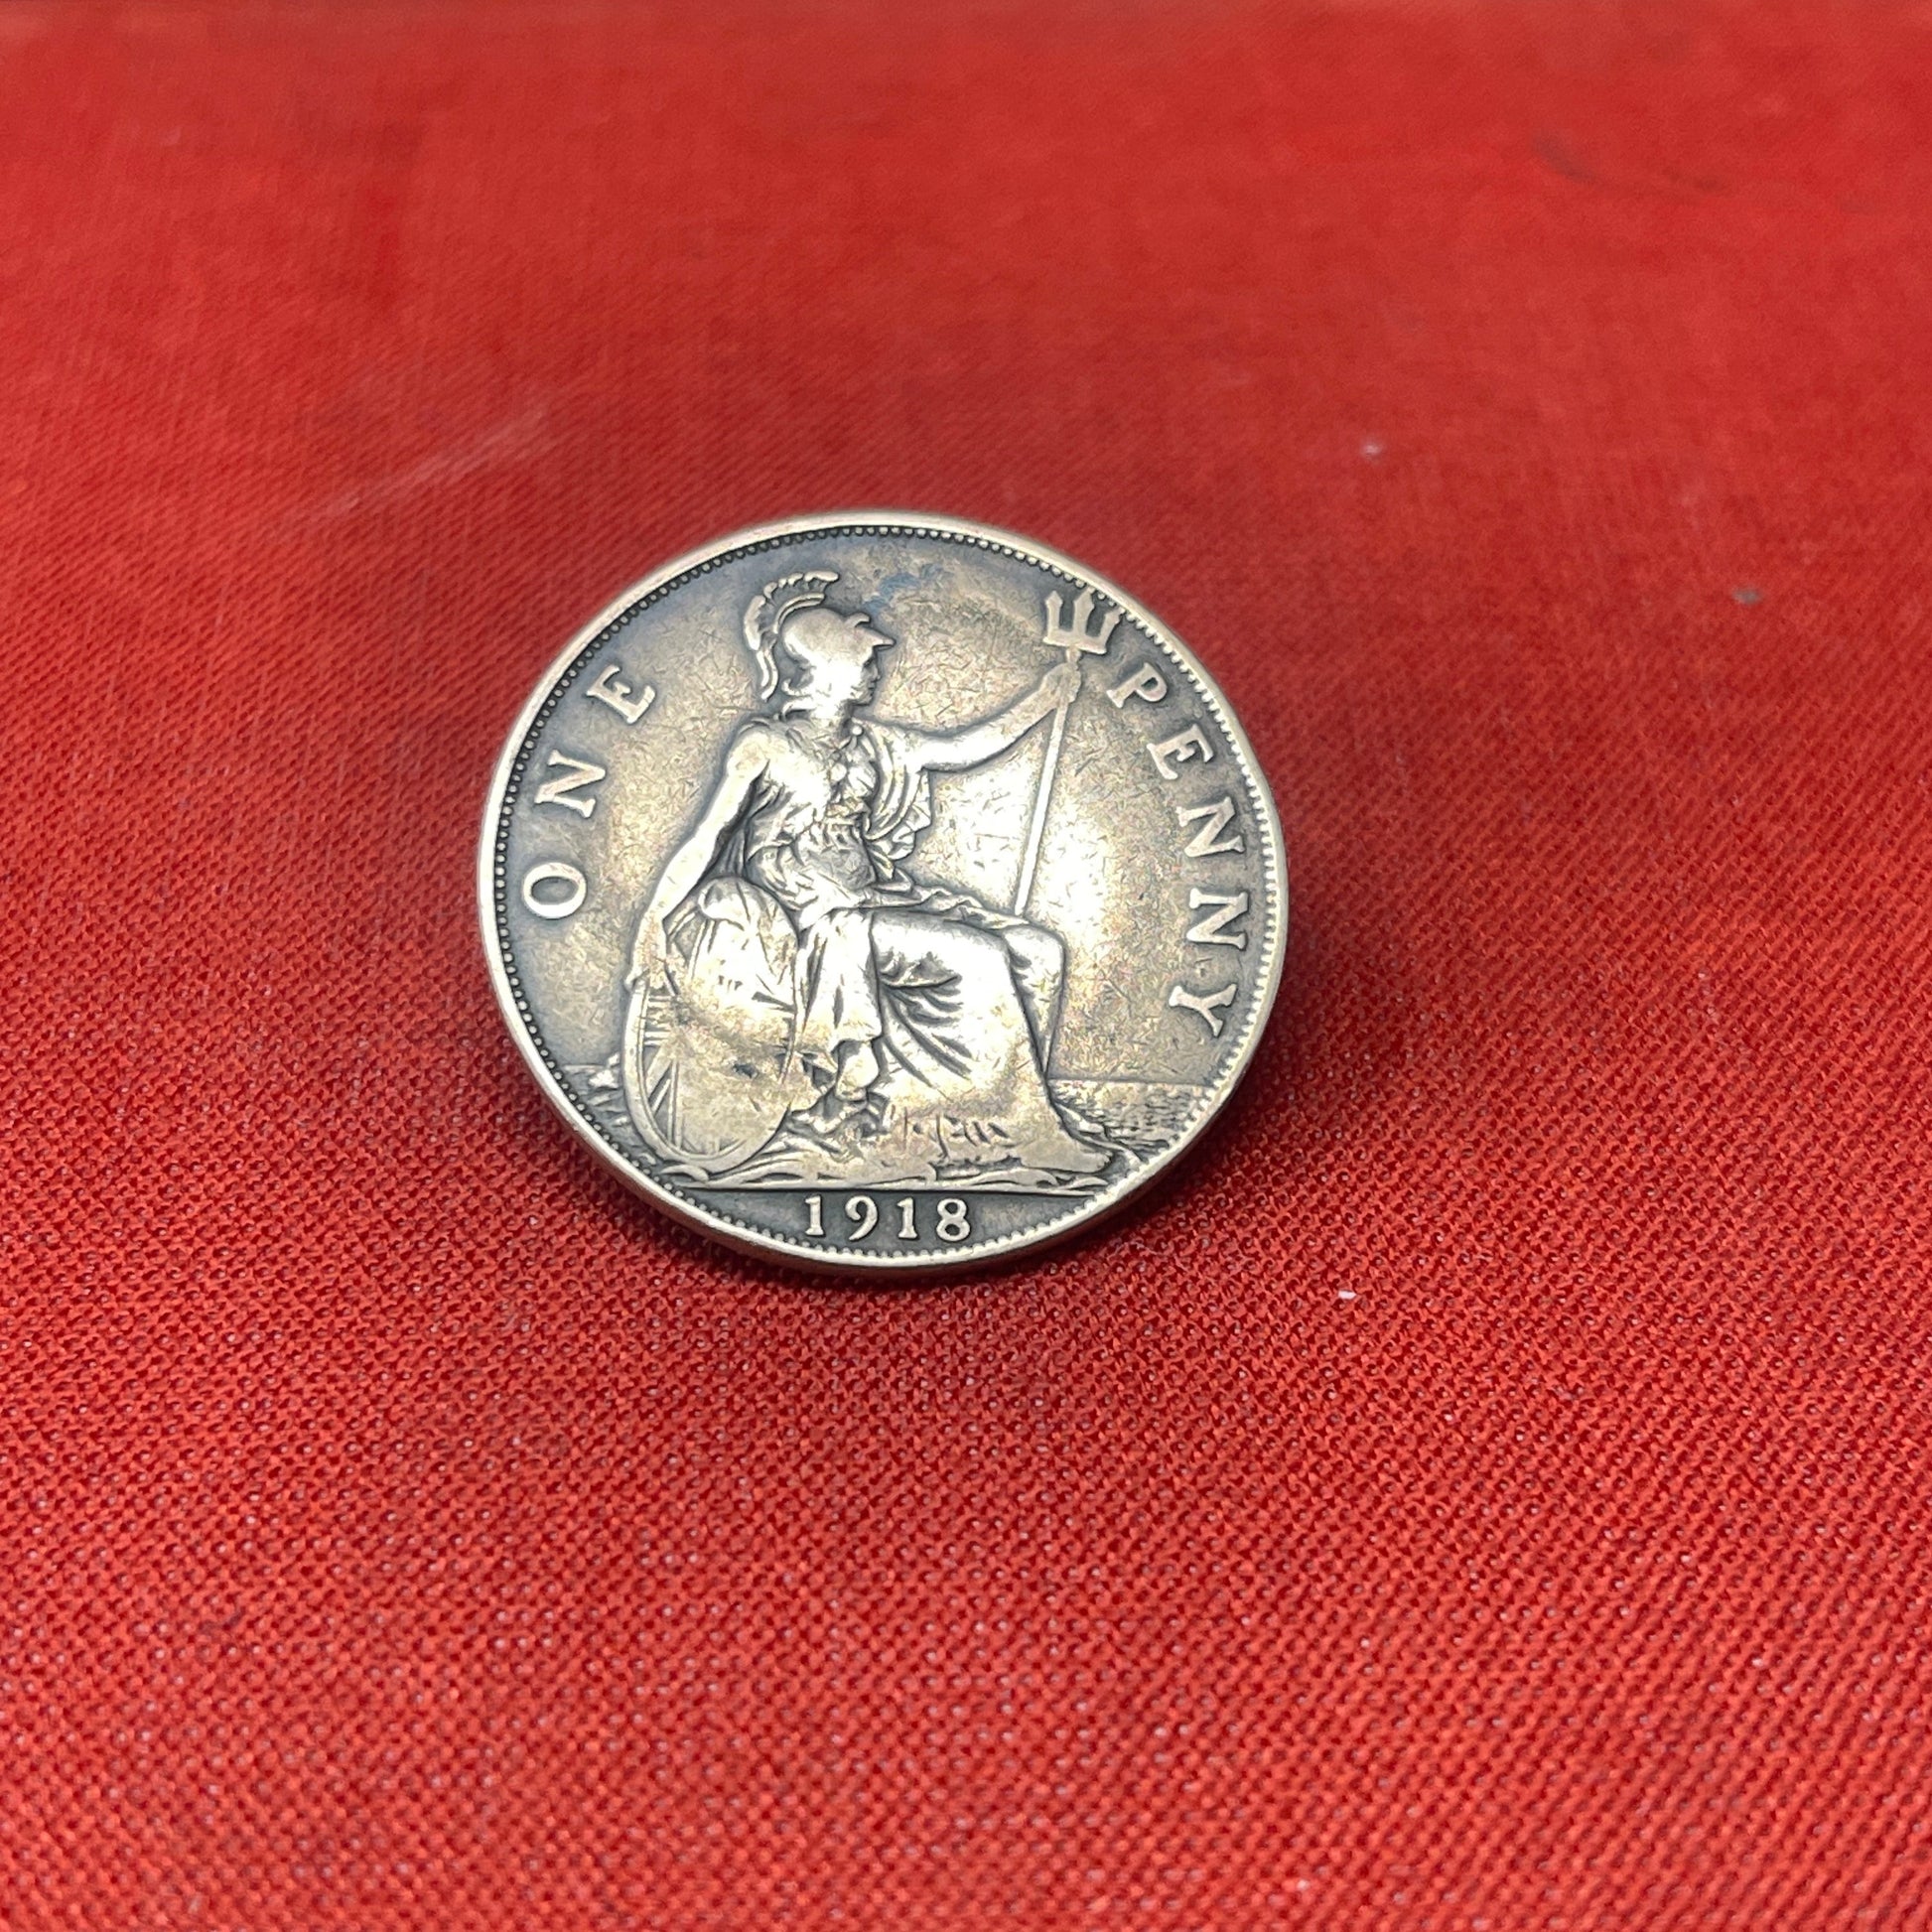 Explore the history and collectability of the King George V One Penny dated 1936. Perfect for numismatists and history enthusiasts seeking an authentic piece of British coinage.